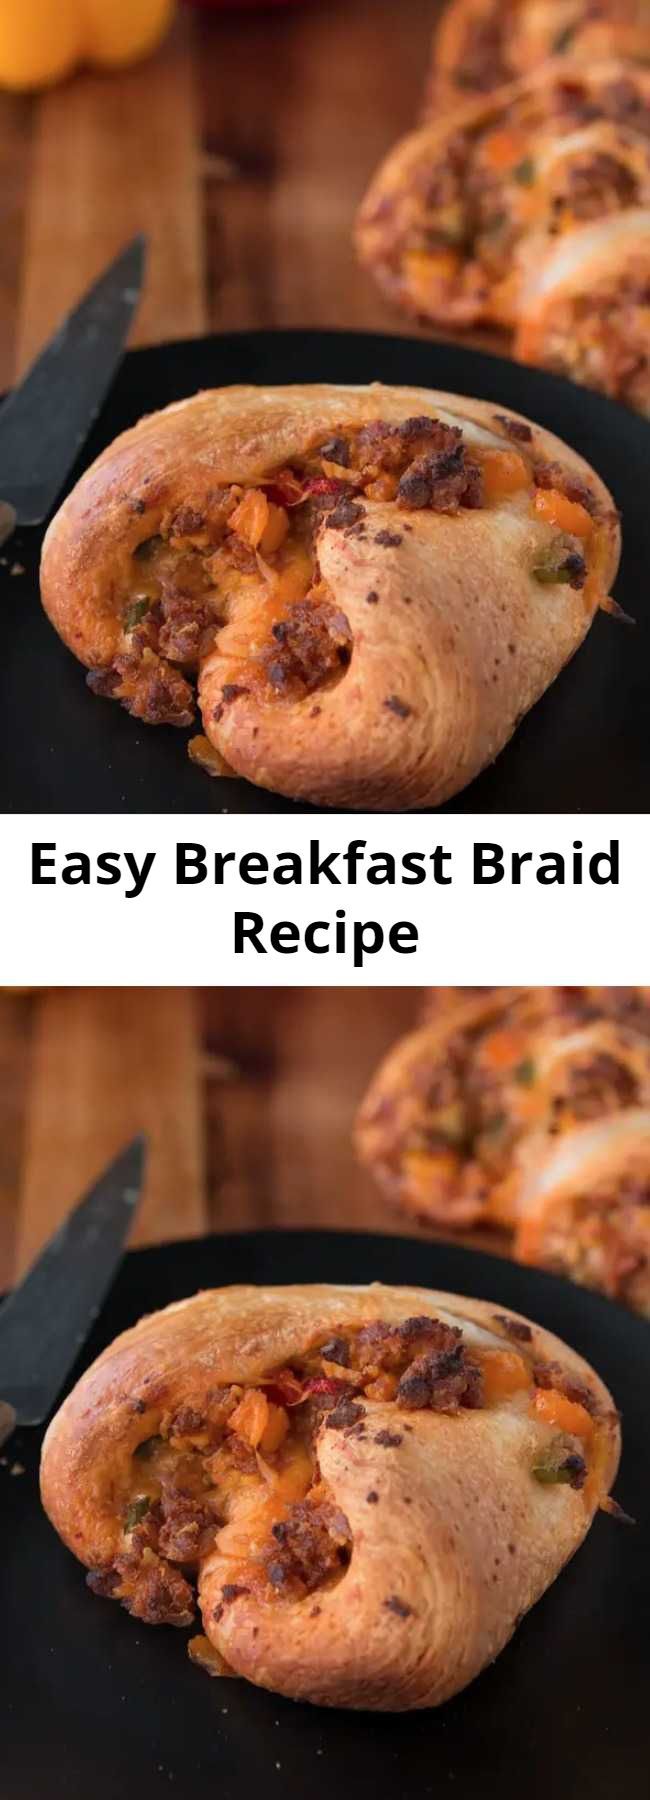 Easy Breakfast Braid Recipe - This breakfast braid is so delicious. You're gonna wanna devour it.